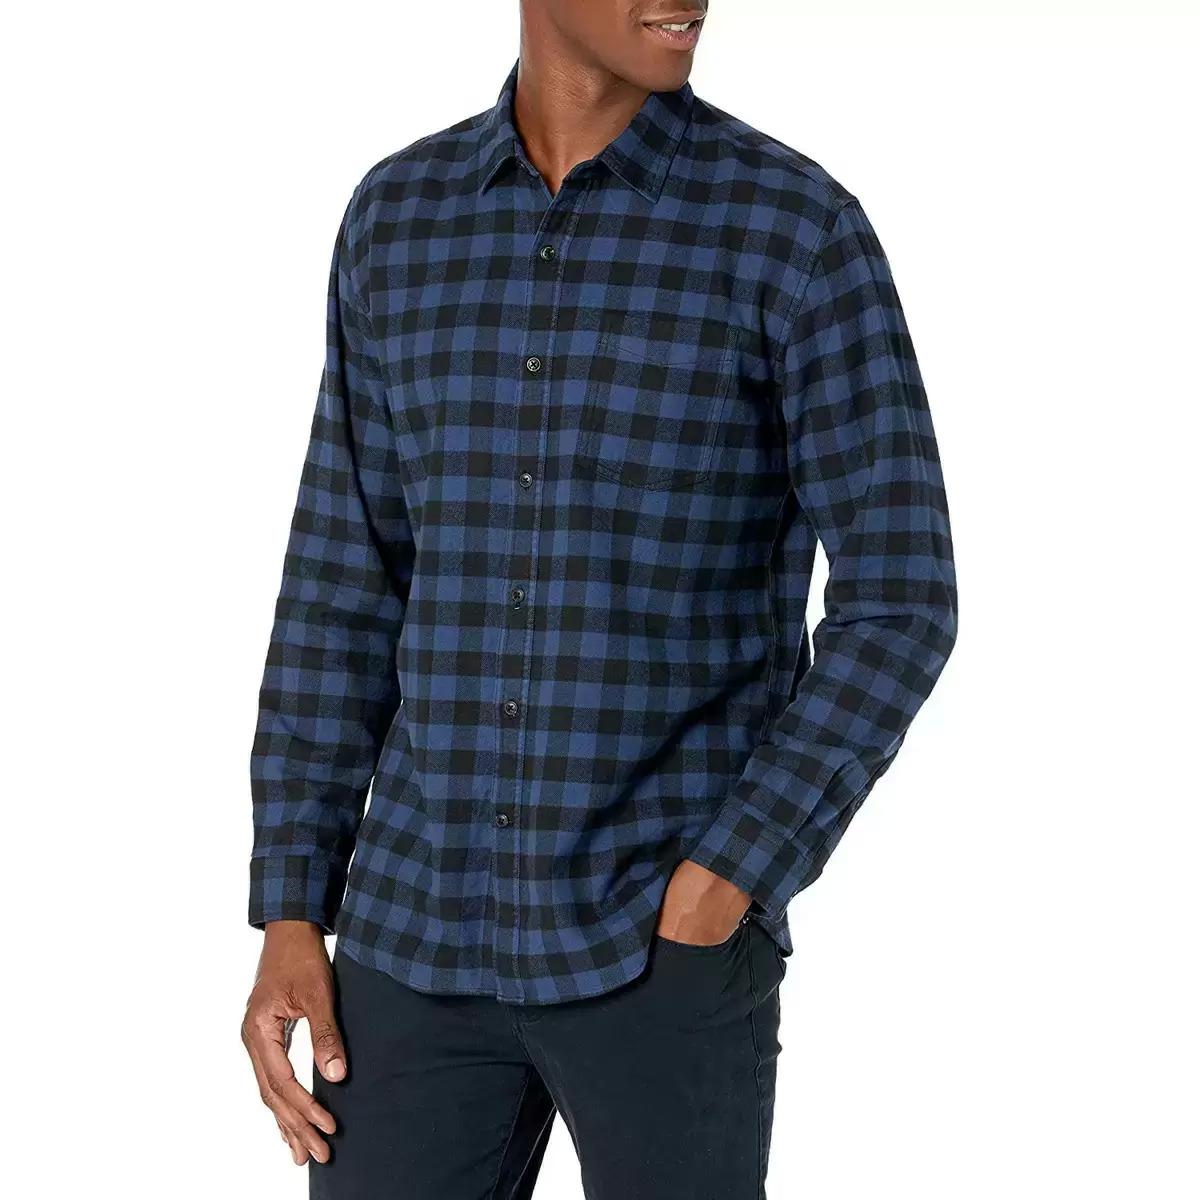 Amazon Essentials Long-Sleeve Flannel Shirt for $13.60